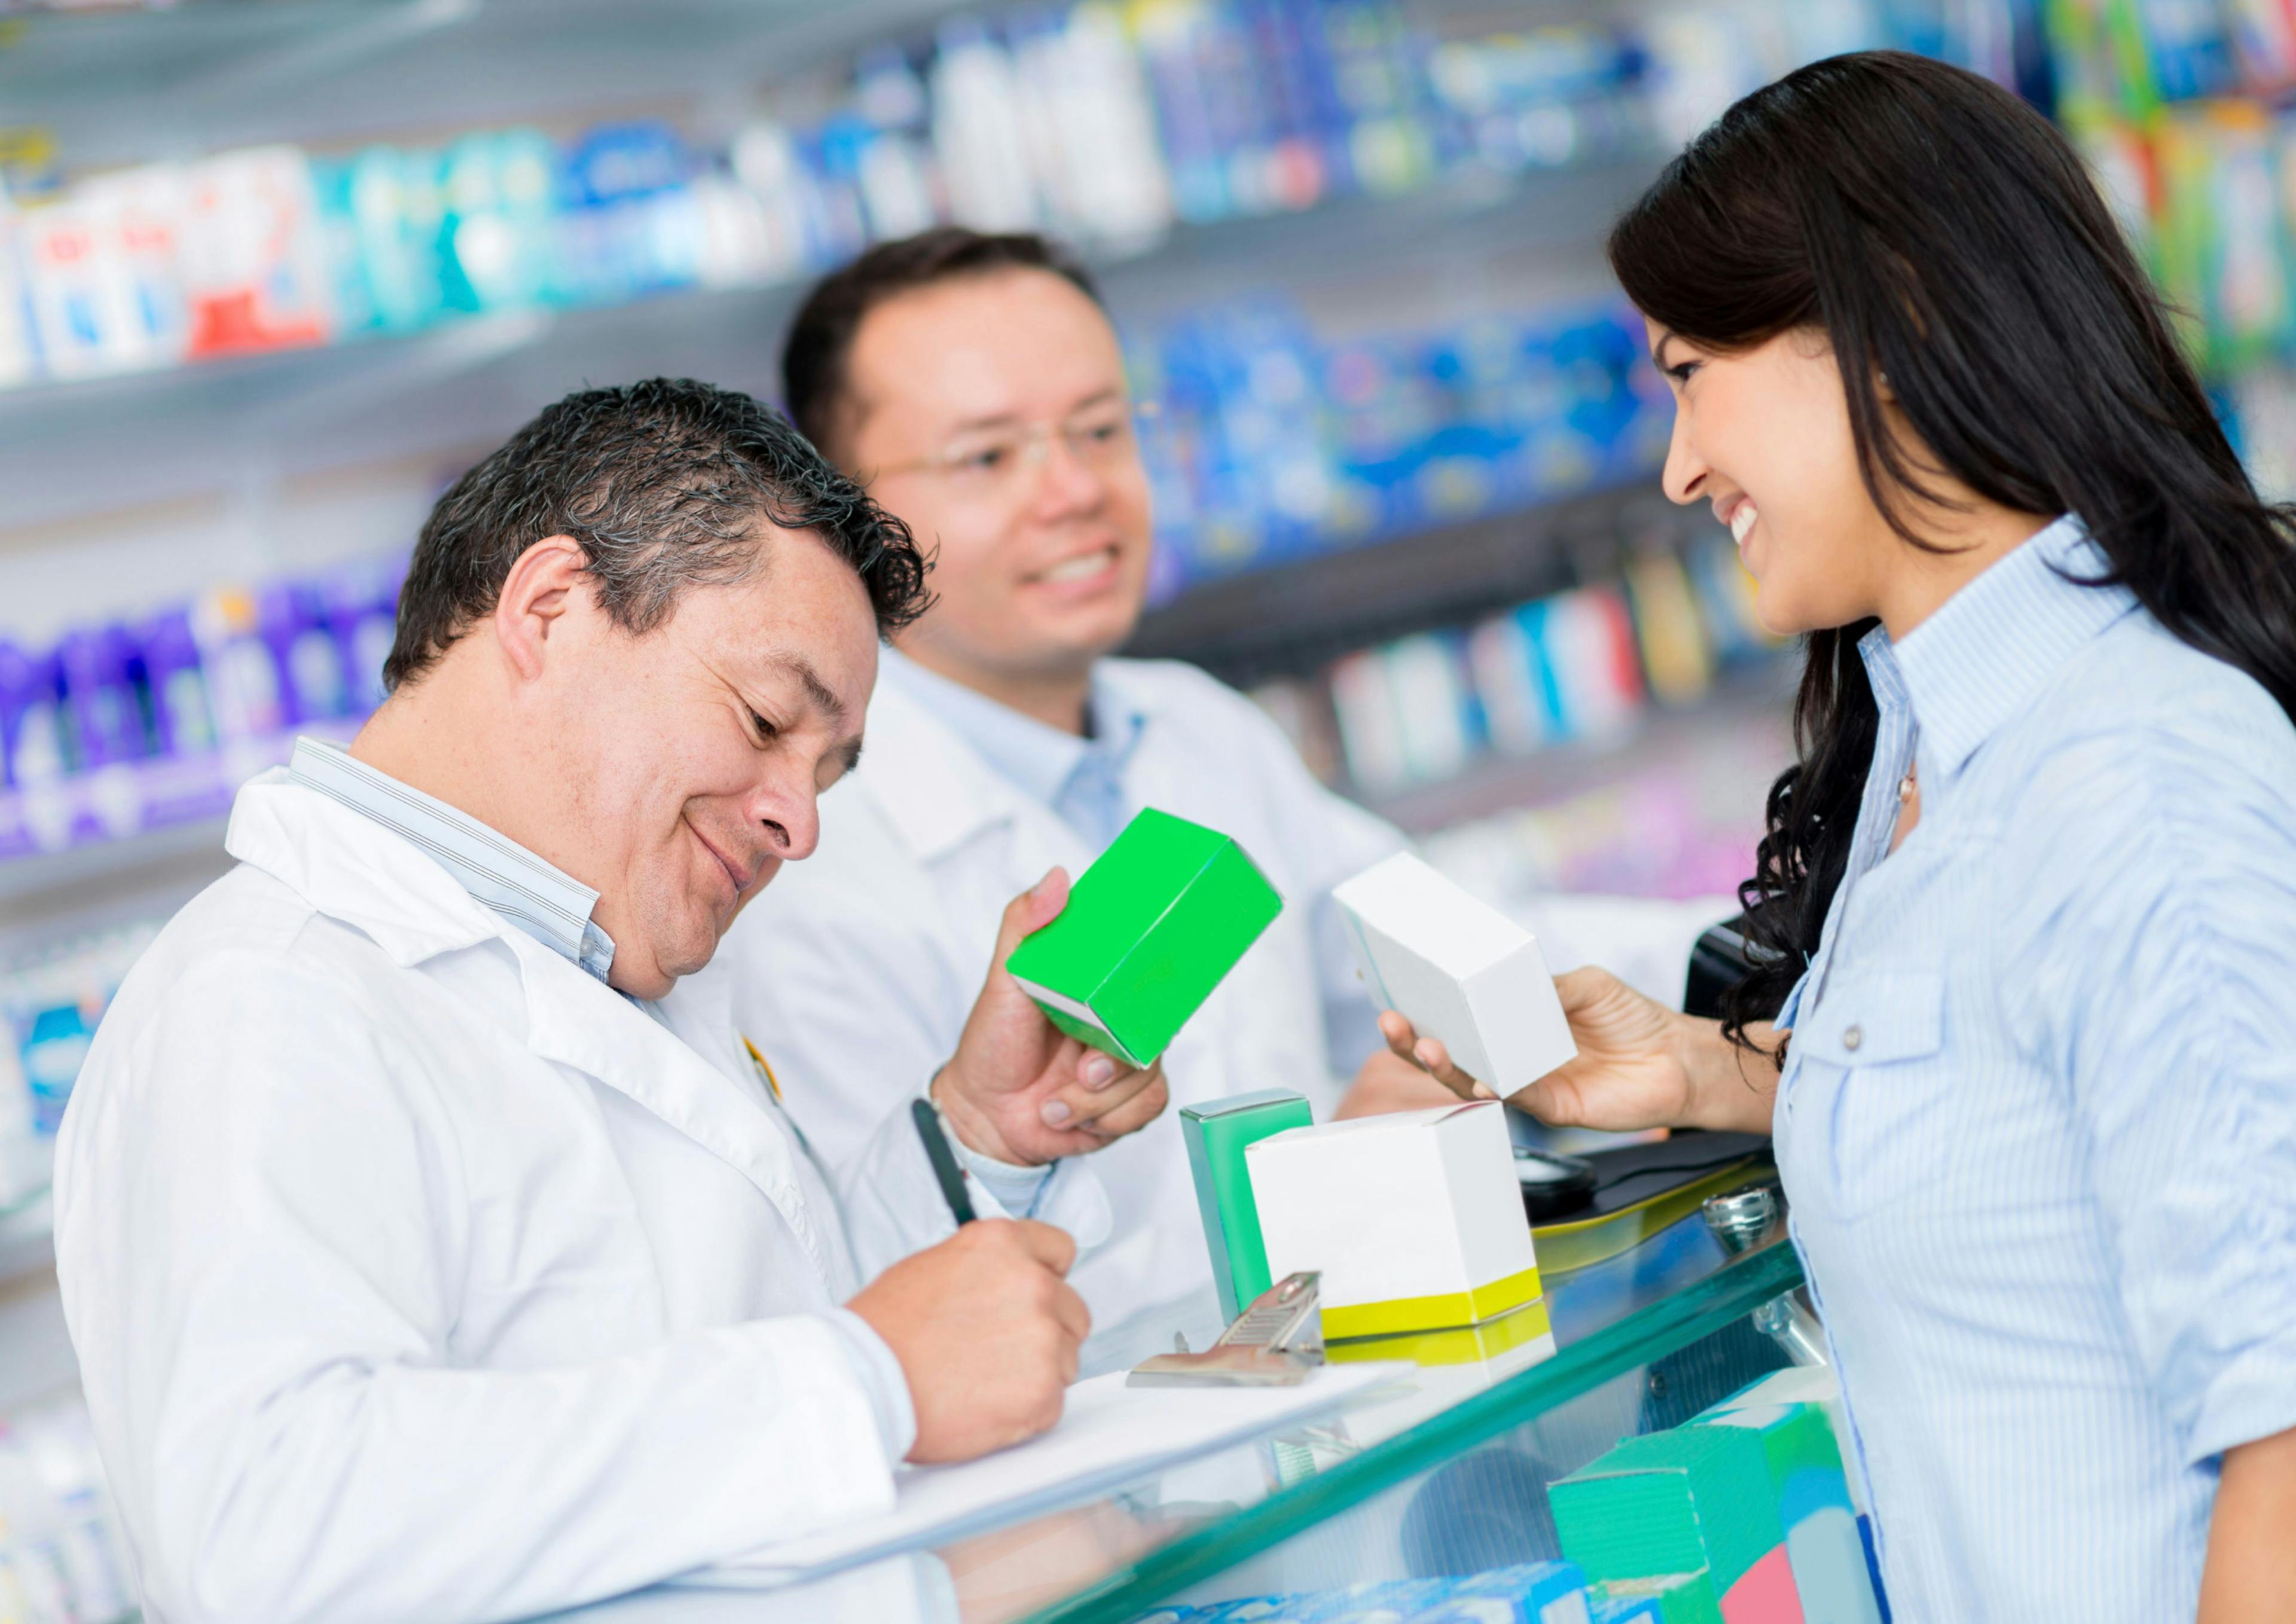 Tip of the Week: Organizational Culture is Essential to a Successful Pharmacy